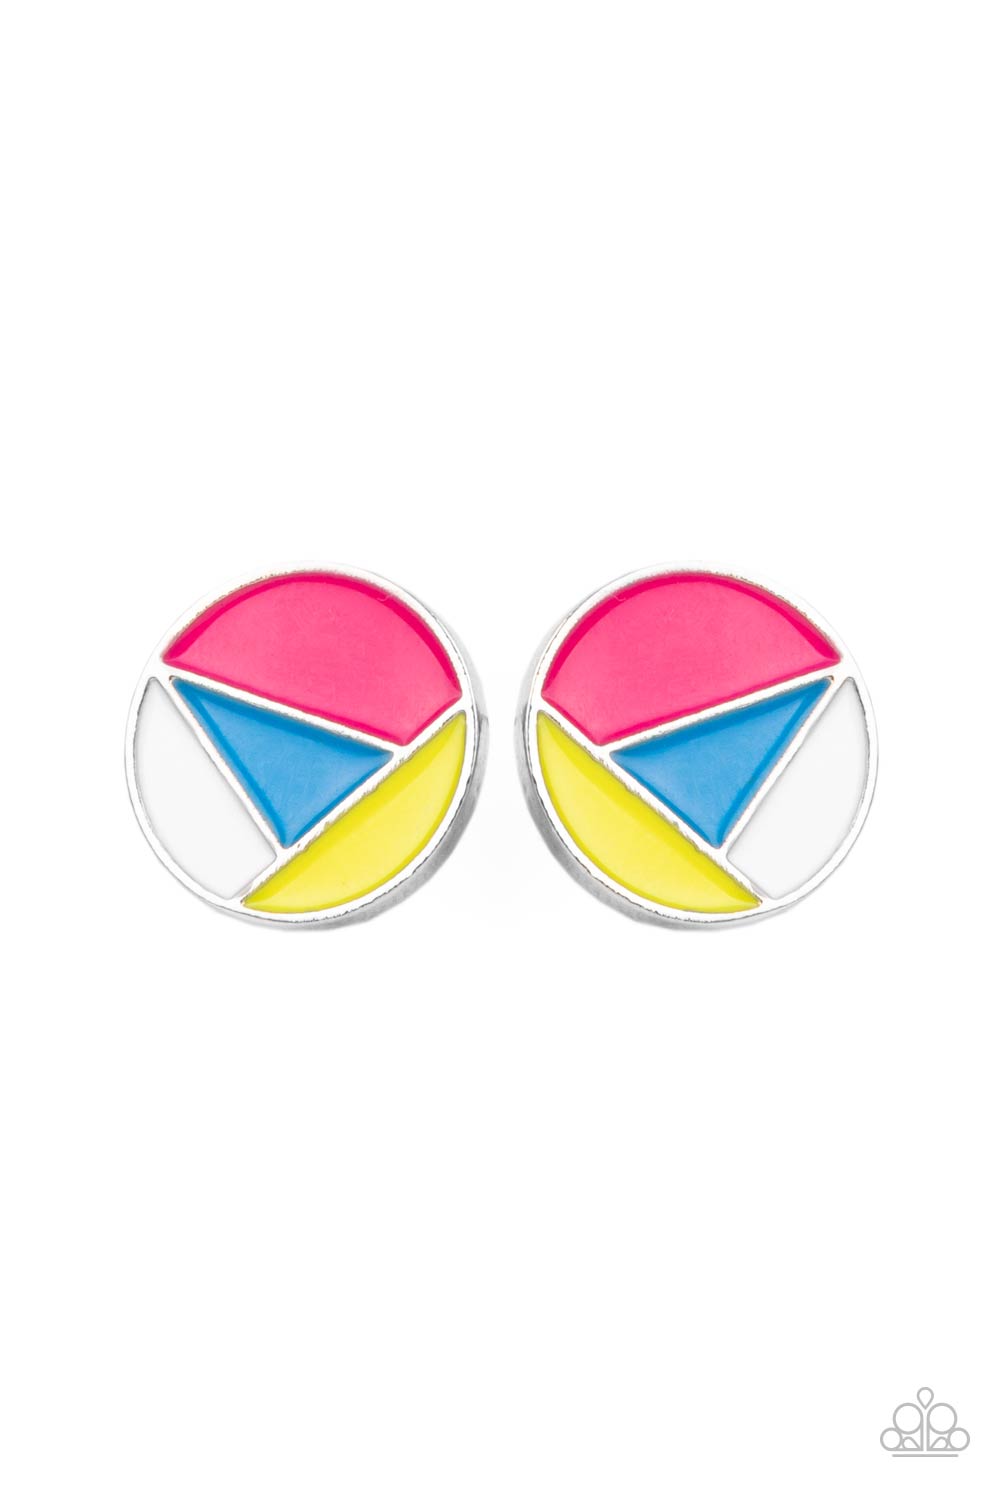 Artistic Expression Multi Pink, Blue and Yellow Post Earrings - Paparazzi Accessories- lightbox - CarasShop.com - $5 Jewelry by Cara Jewels